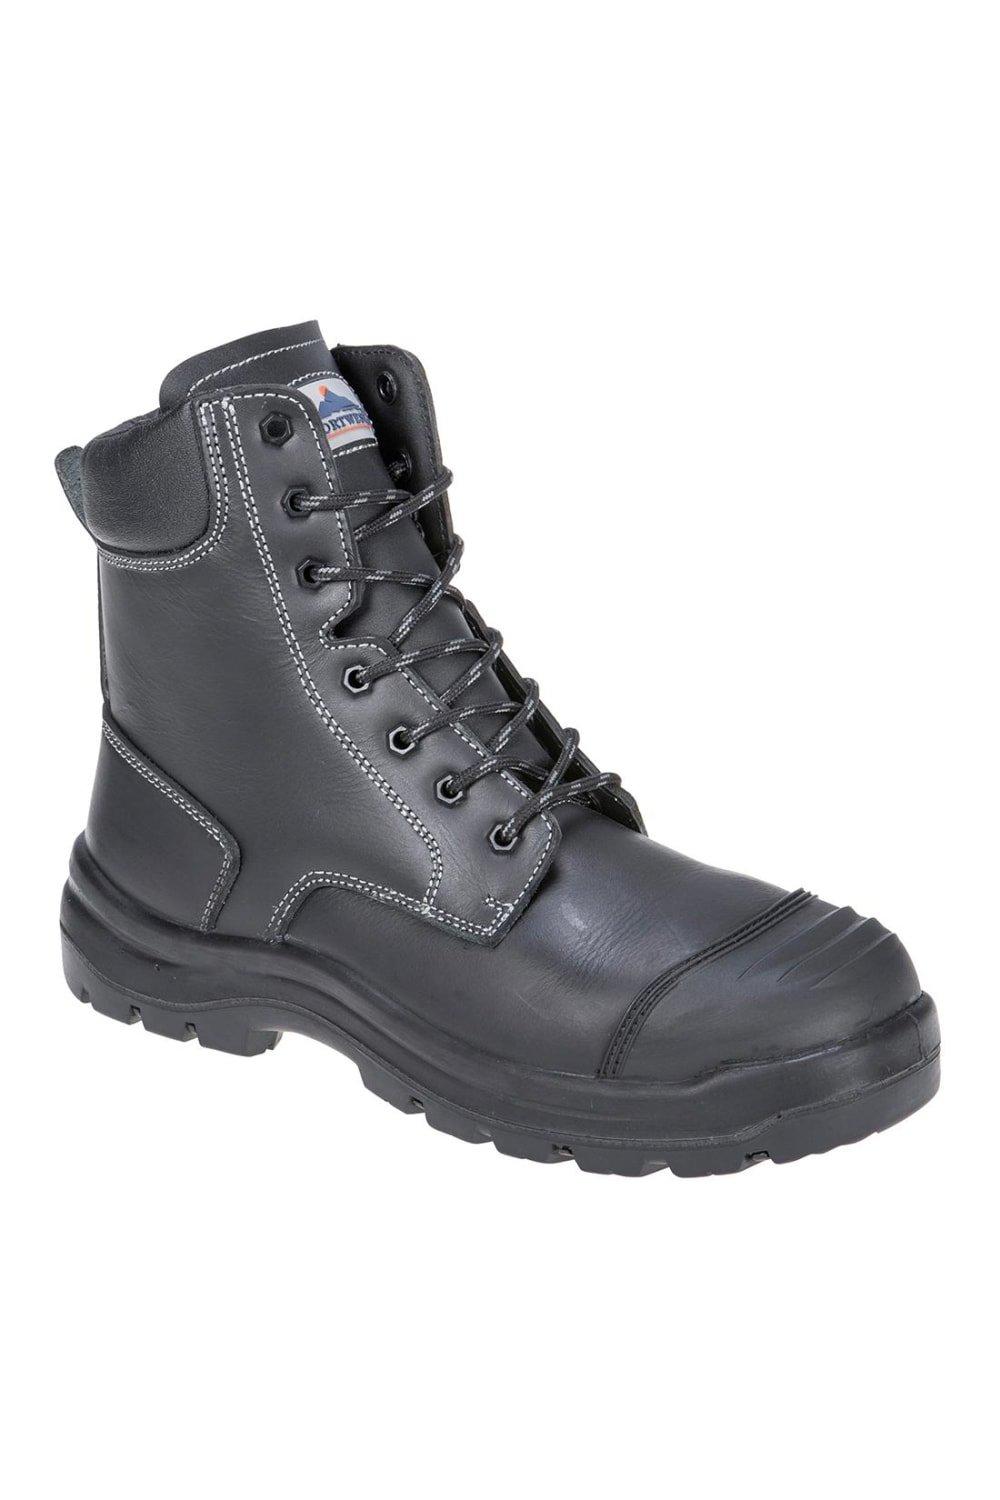 Eden Leather Safety Boots